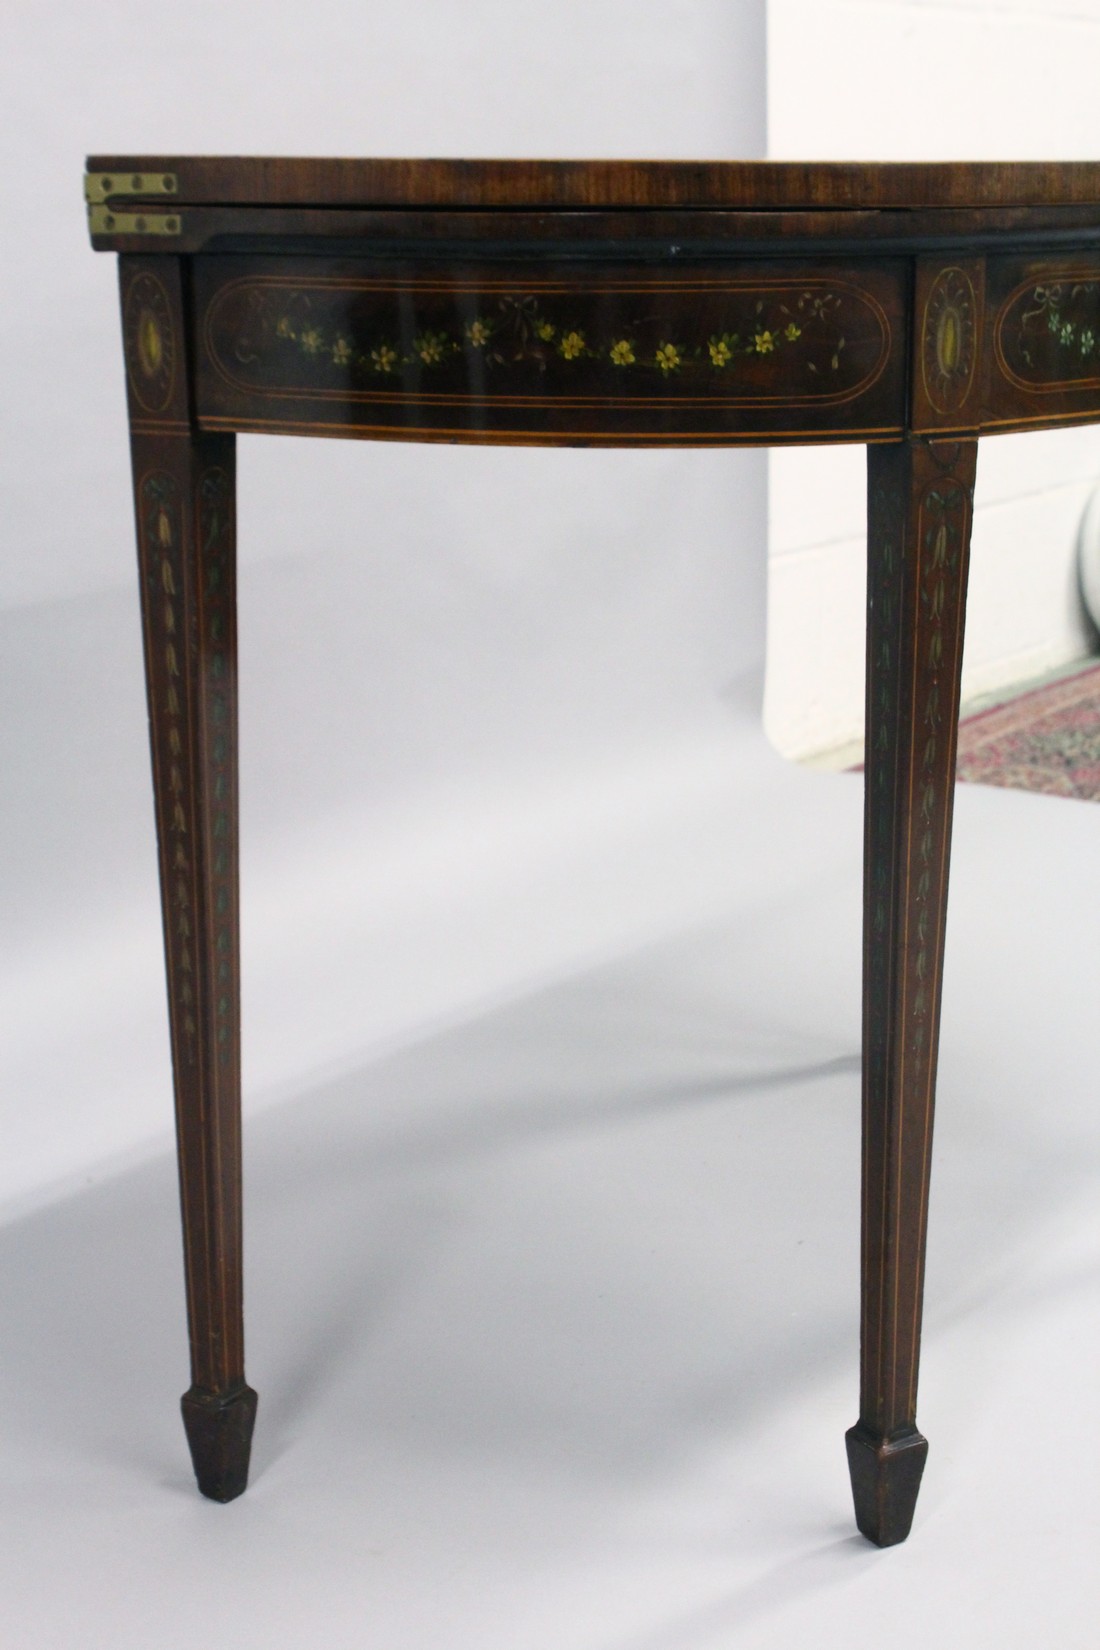 A GEORGIAN SHERATON REVIVAL MAHOGANY CARD TABLE painted with garlands and flowers with banded top - Image 4 of 8